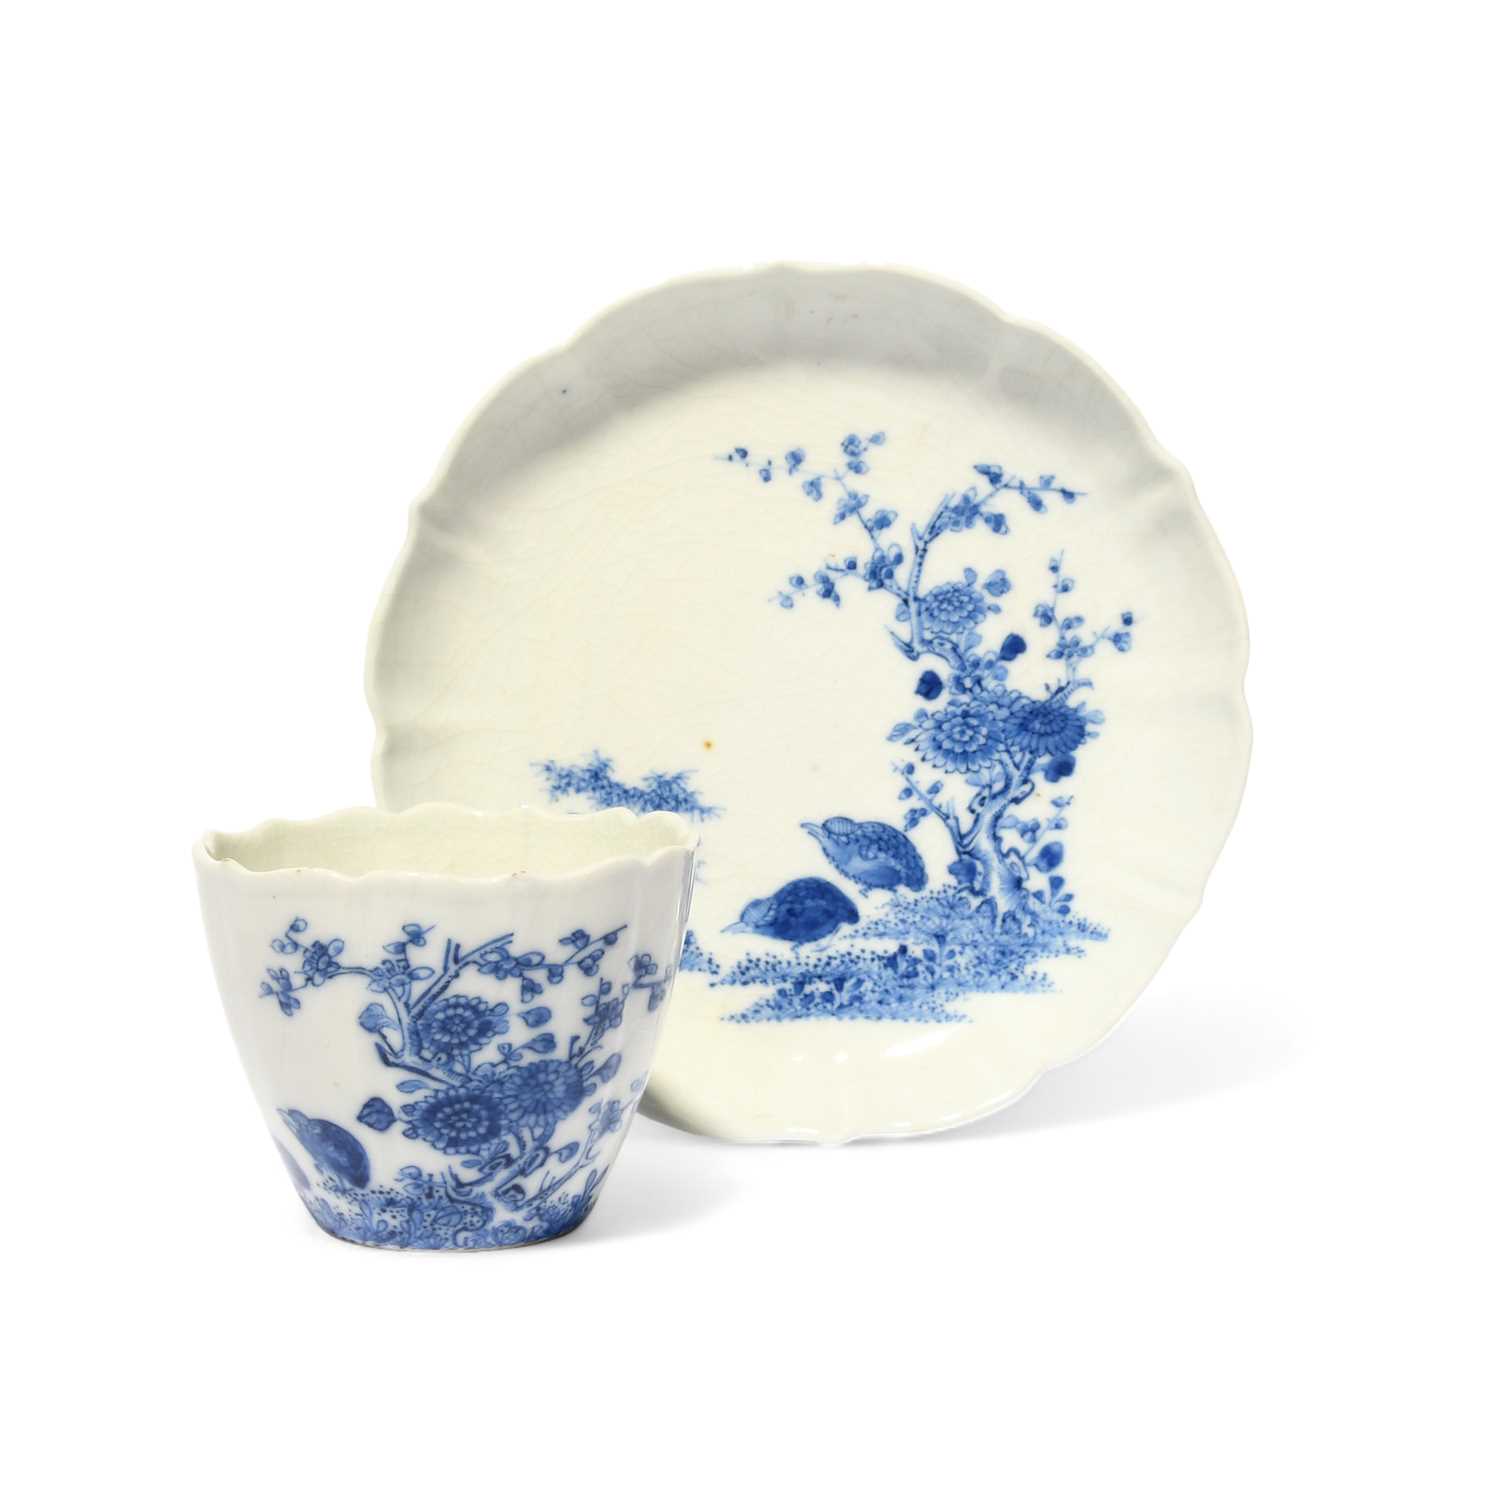 A Chinese soft-paste porcelain blue and white teabowl and saucer, mid 18th century, of lobed form,